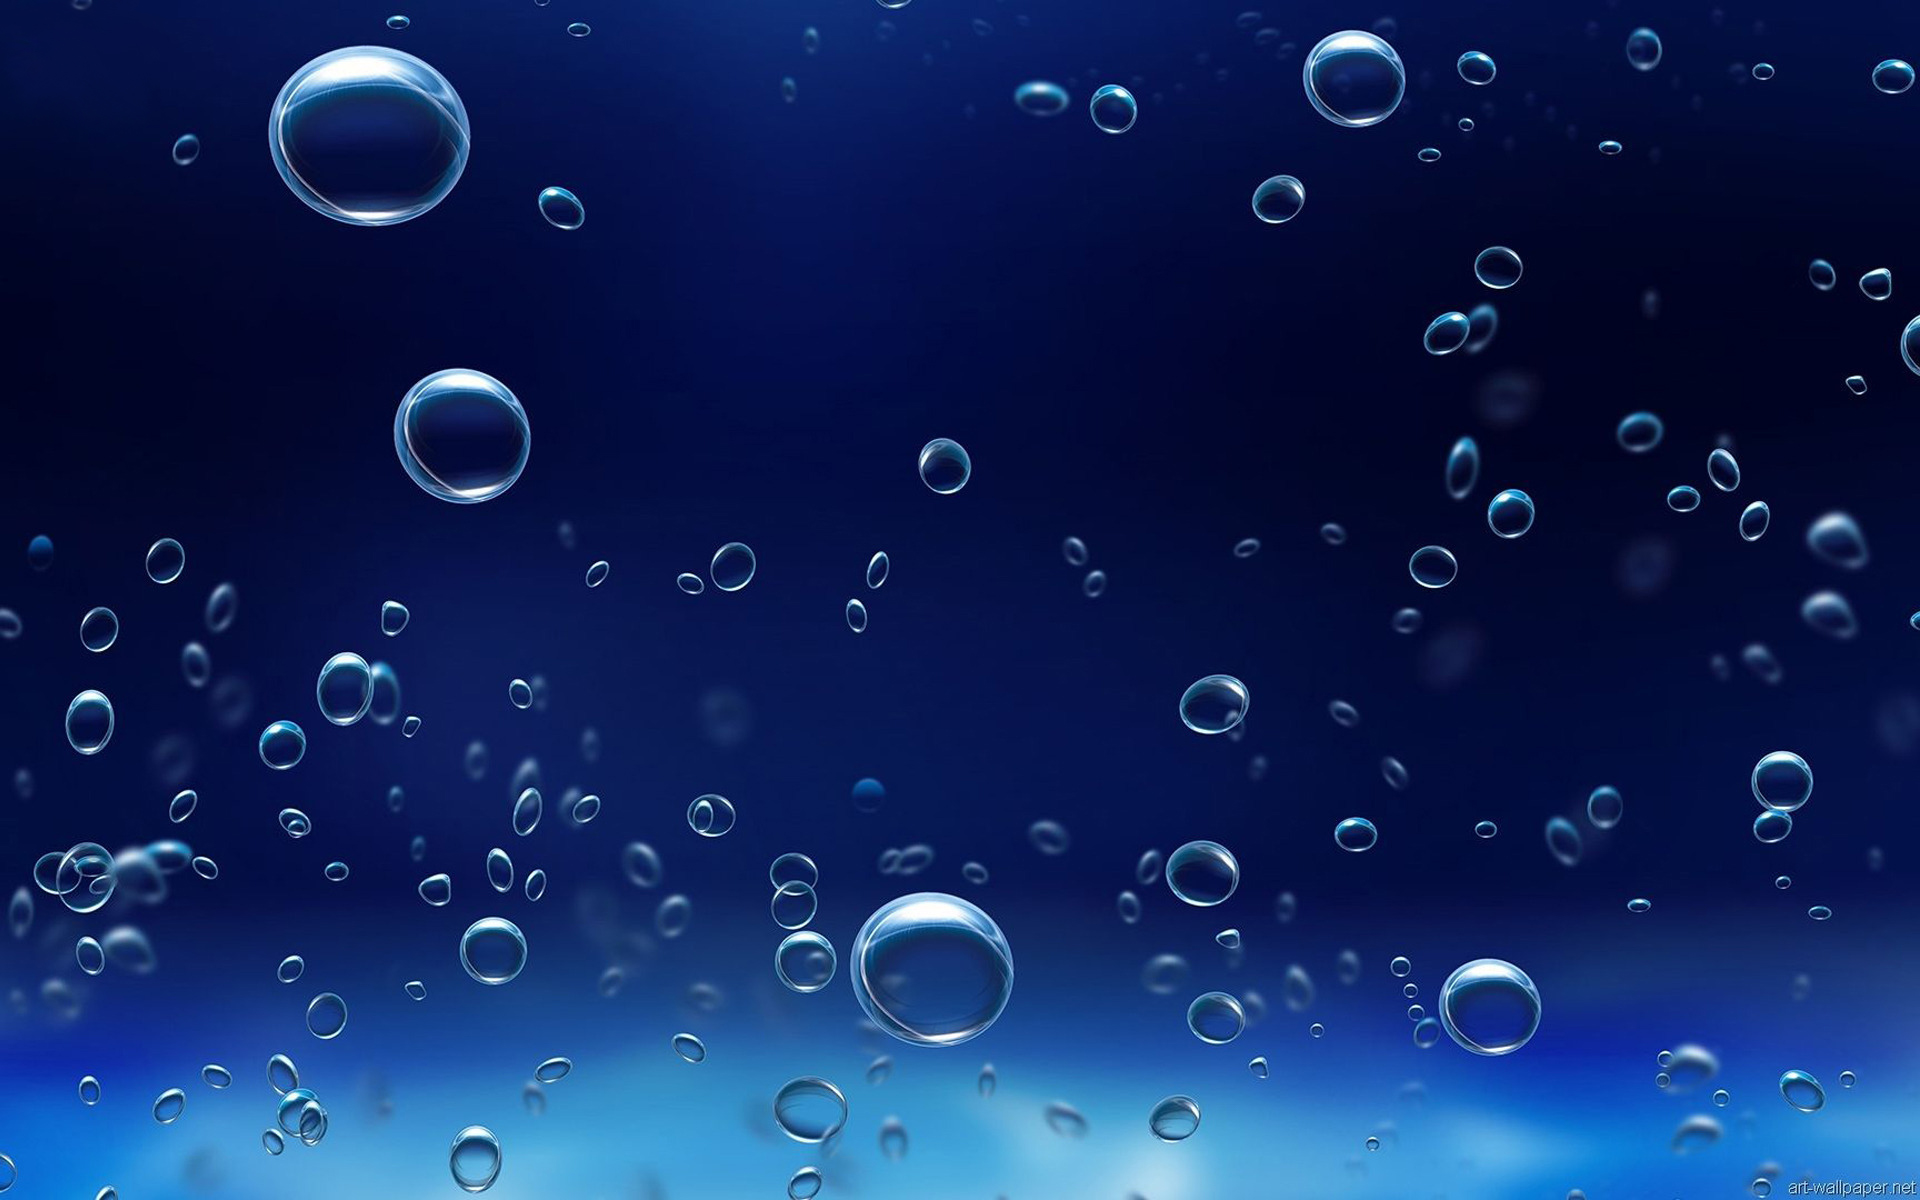 particle playground underwater bubbles